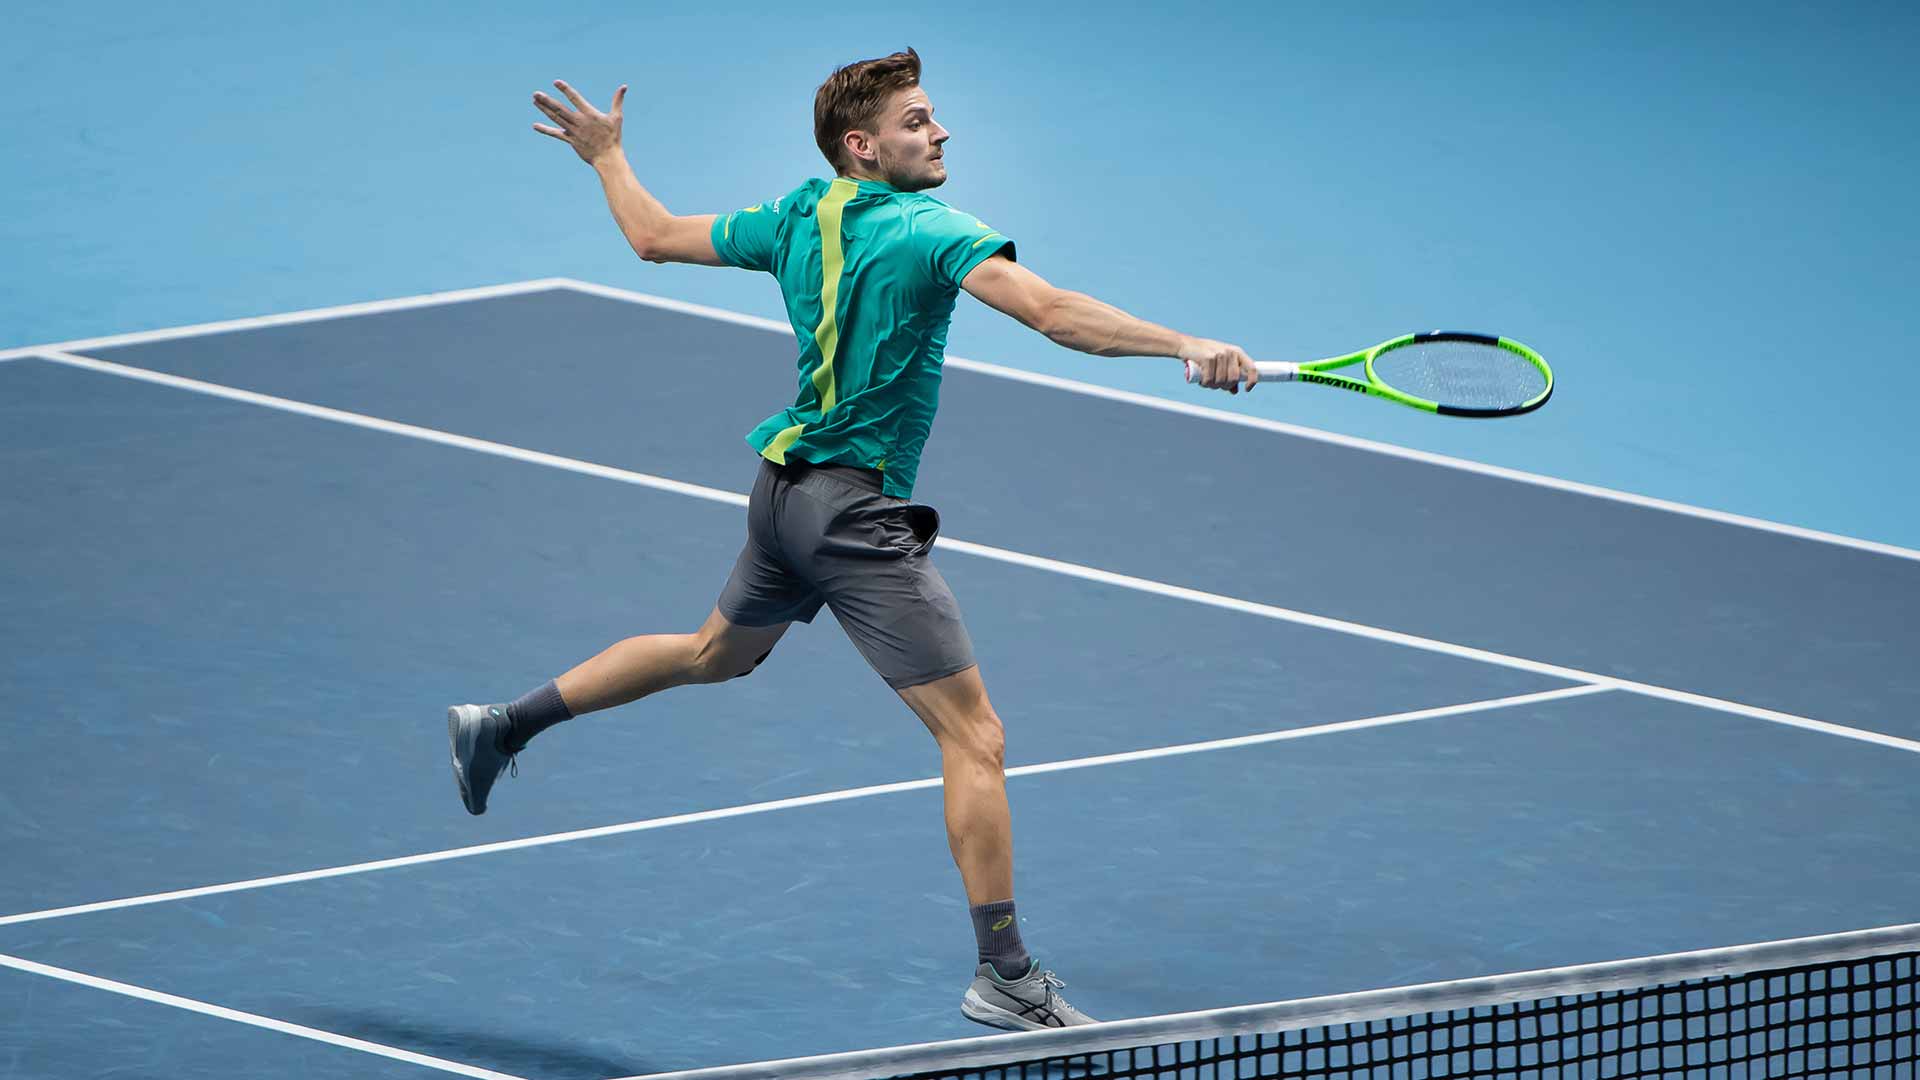 David Goffin To Face Roger Federer In Nitto ATP Finals SFs | Nitto ATP Finals